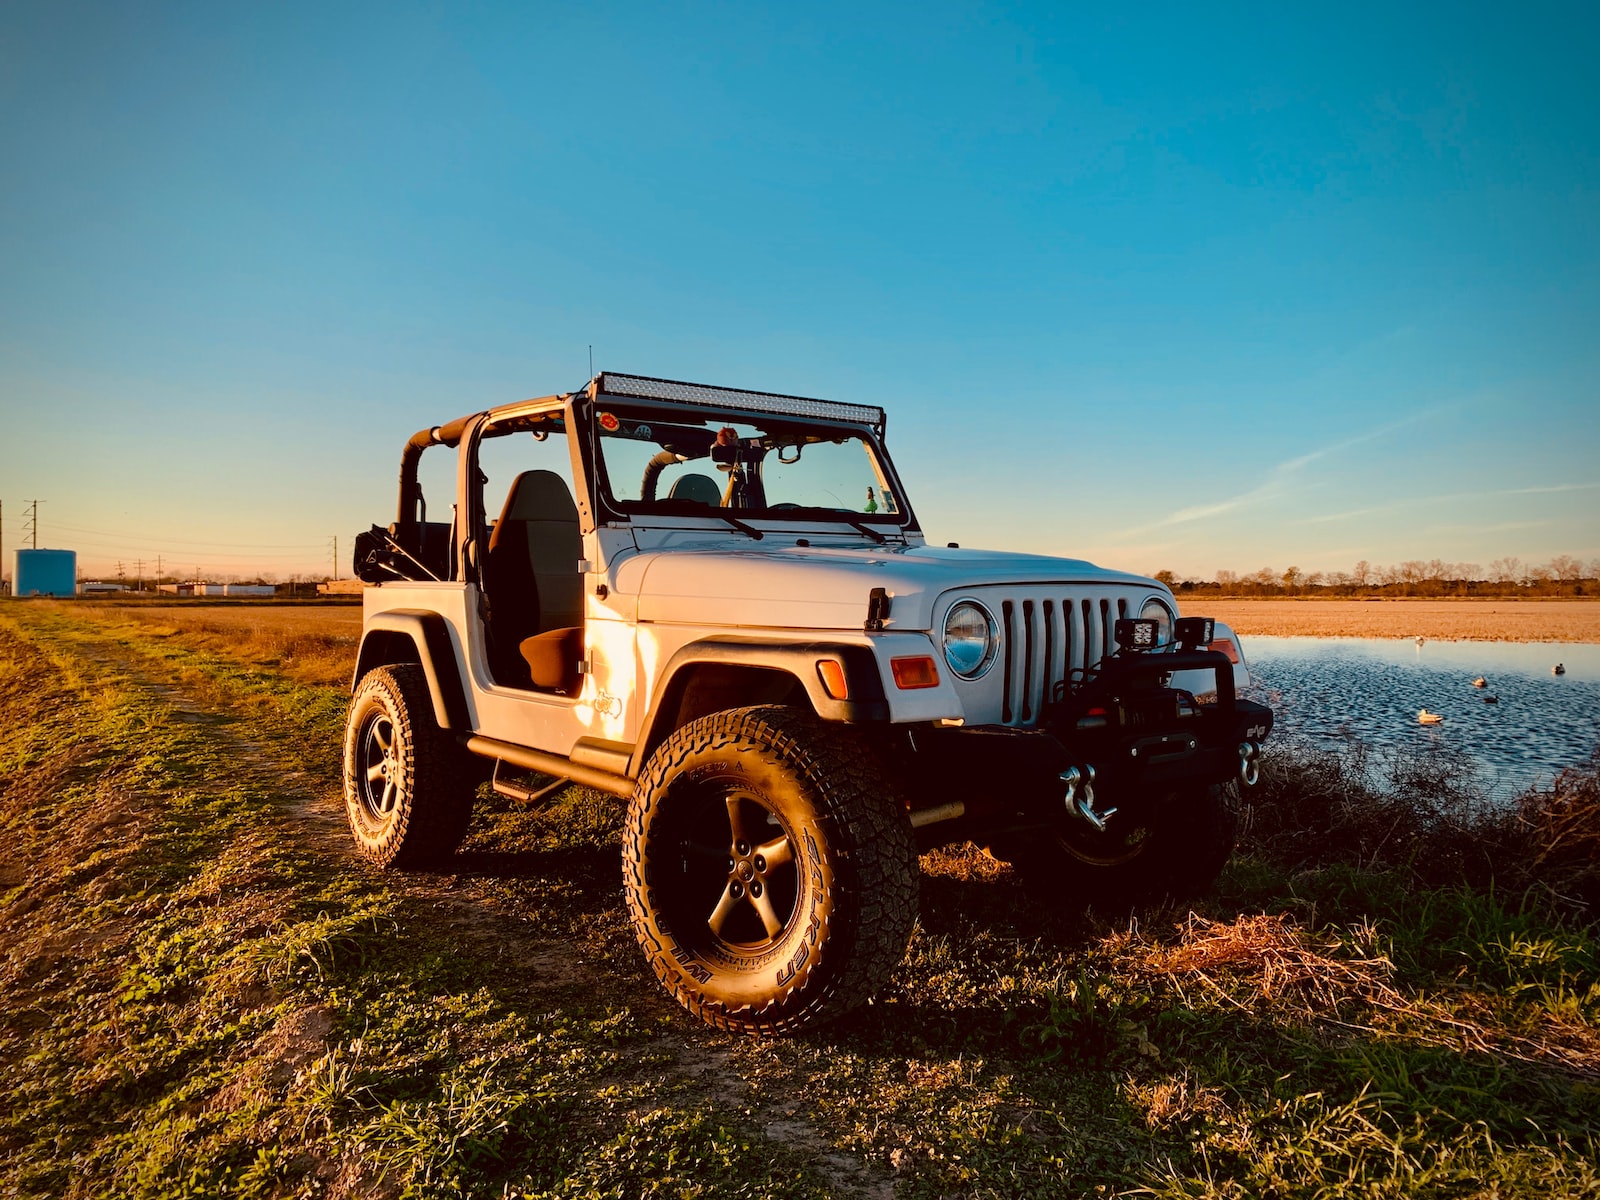 5 Best Racks For Jeep Wranglers - Secure And Stylish Surfboard Storage